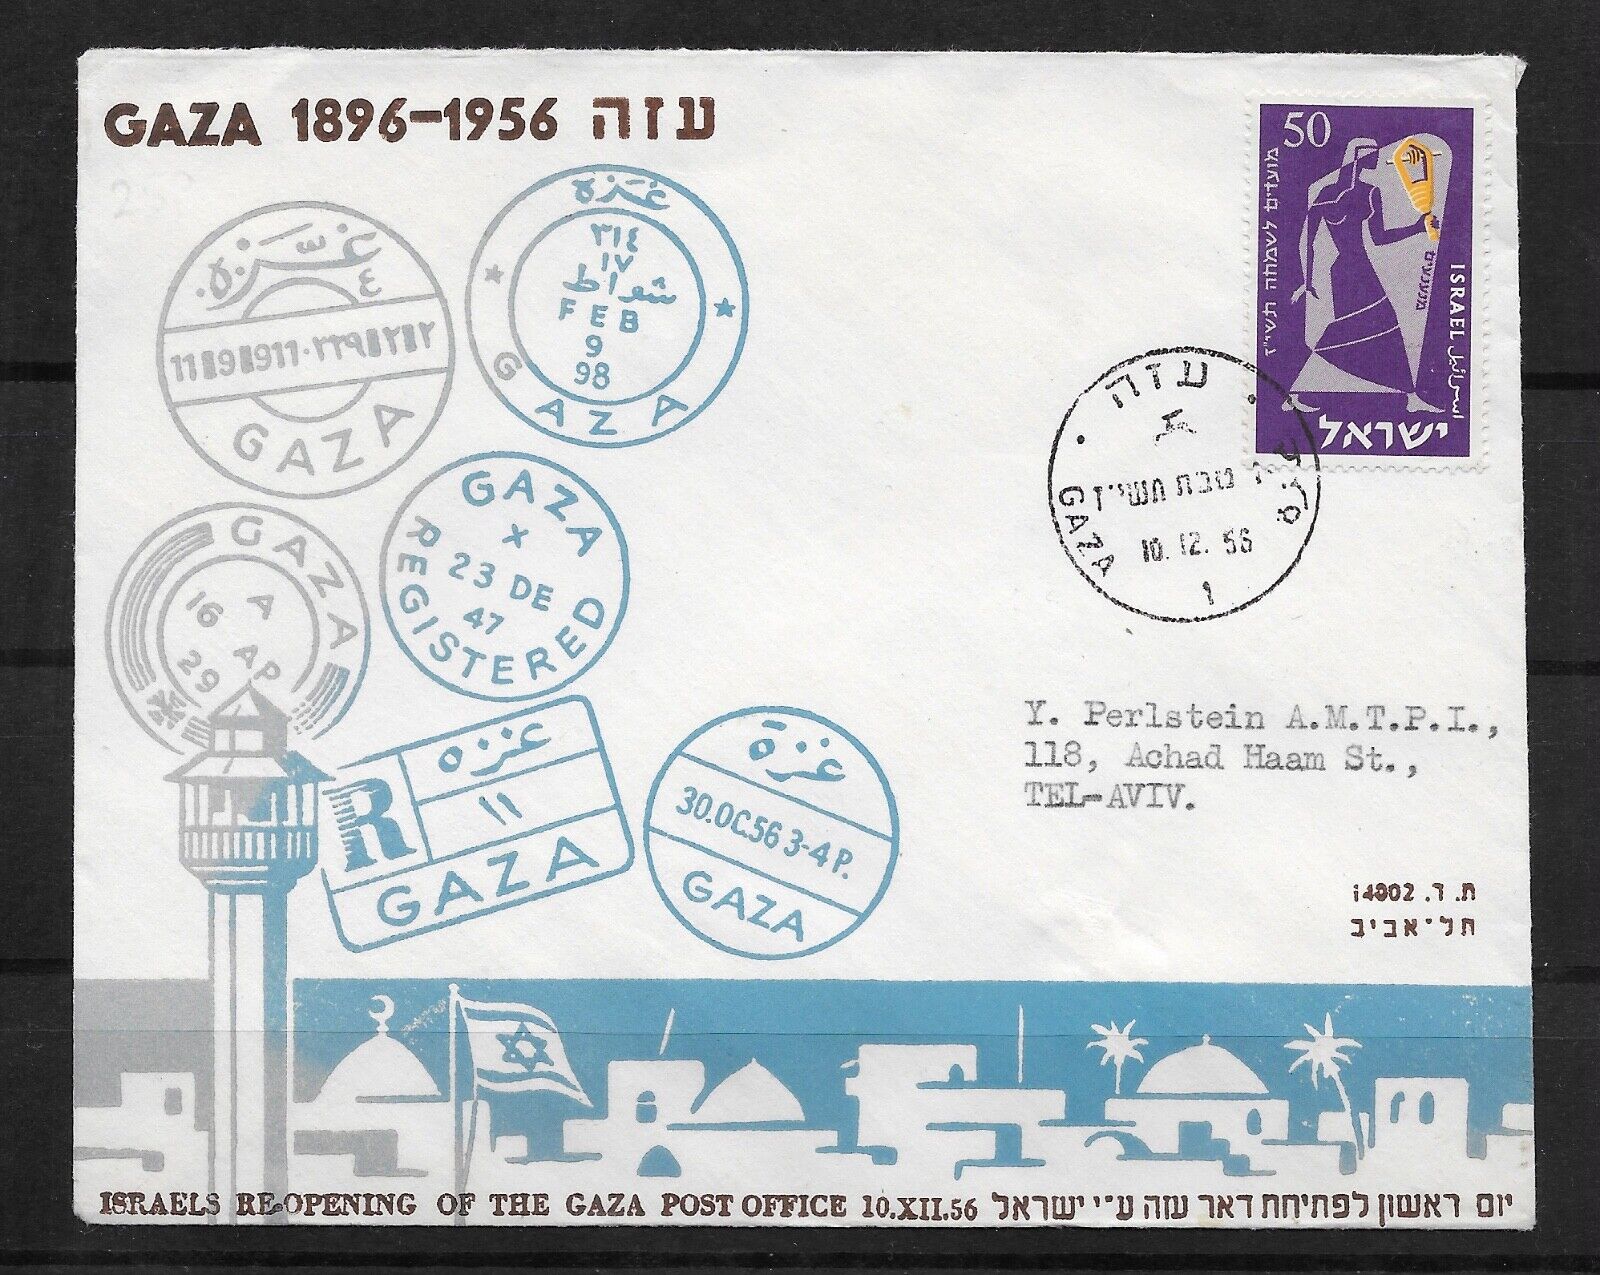 L2267 Palestine GAZA COVER 10-12-1956 ISRAELS RE OPENING OF THE GAZA POST OFFICE